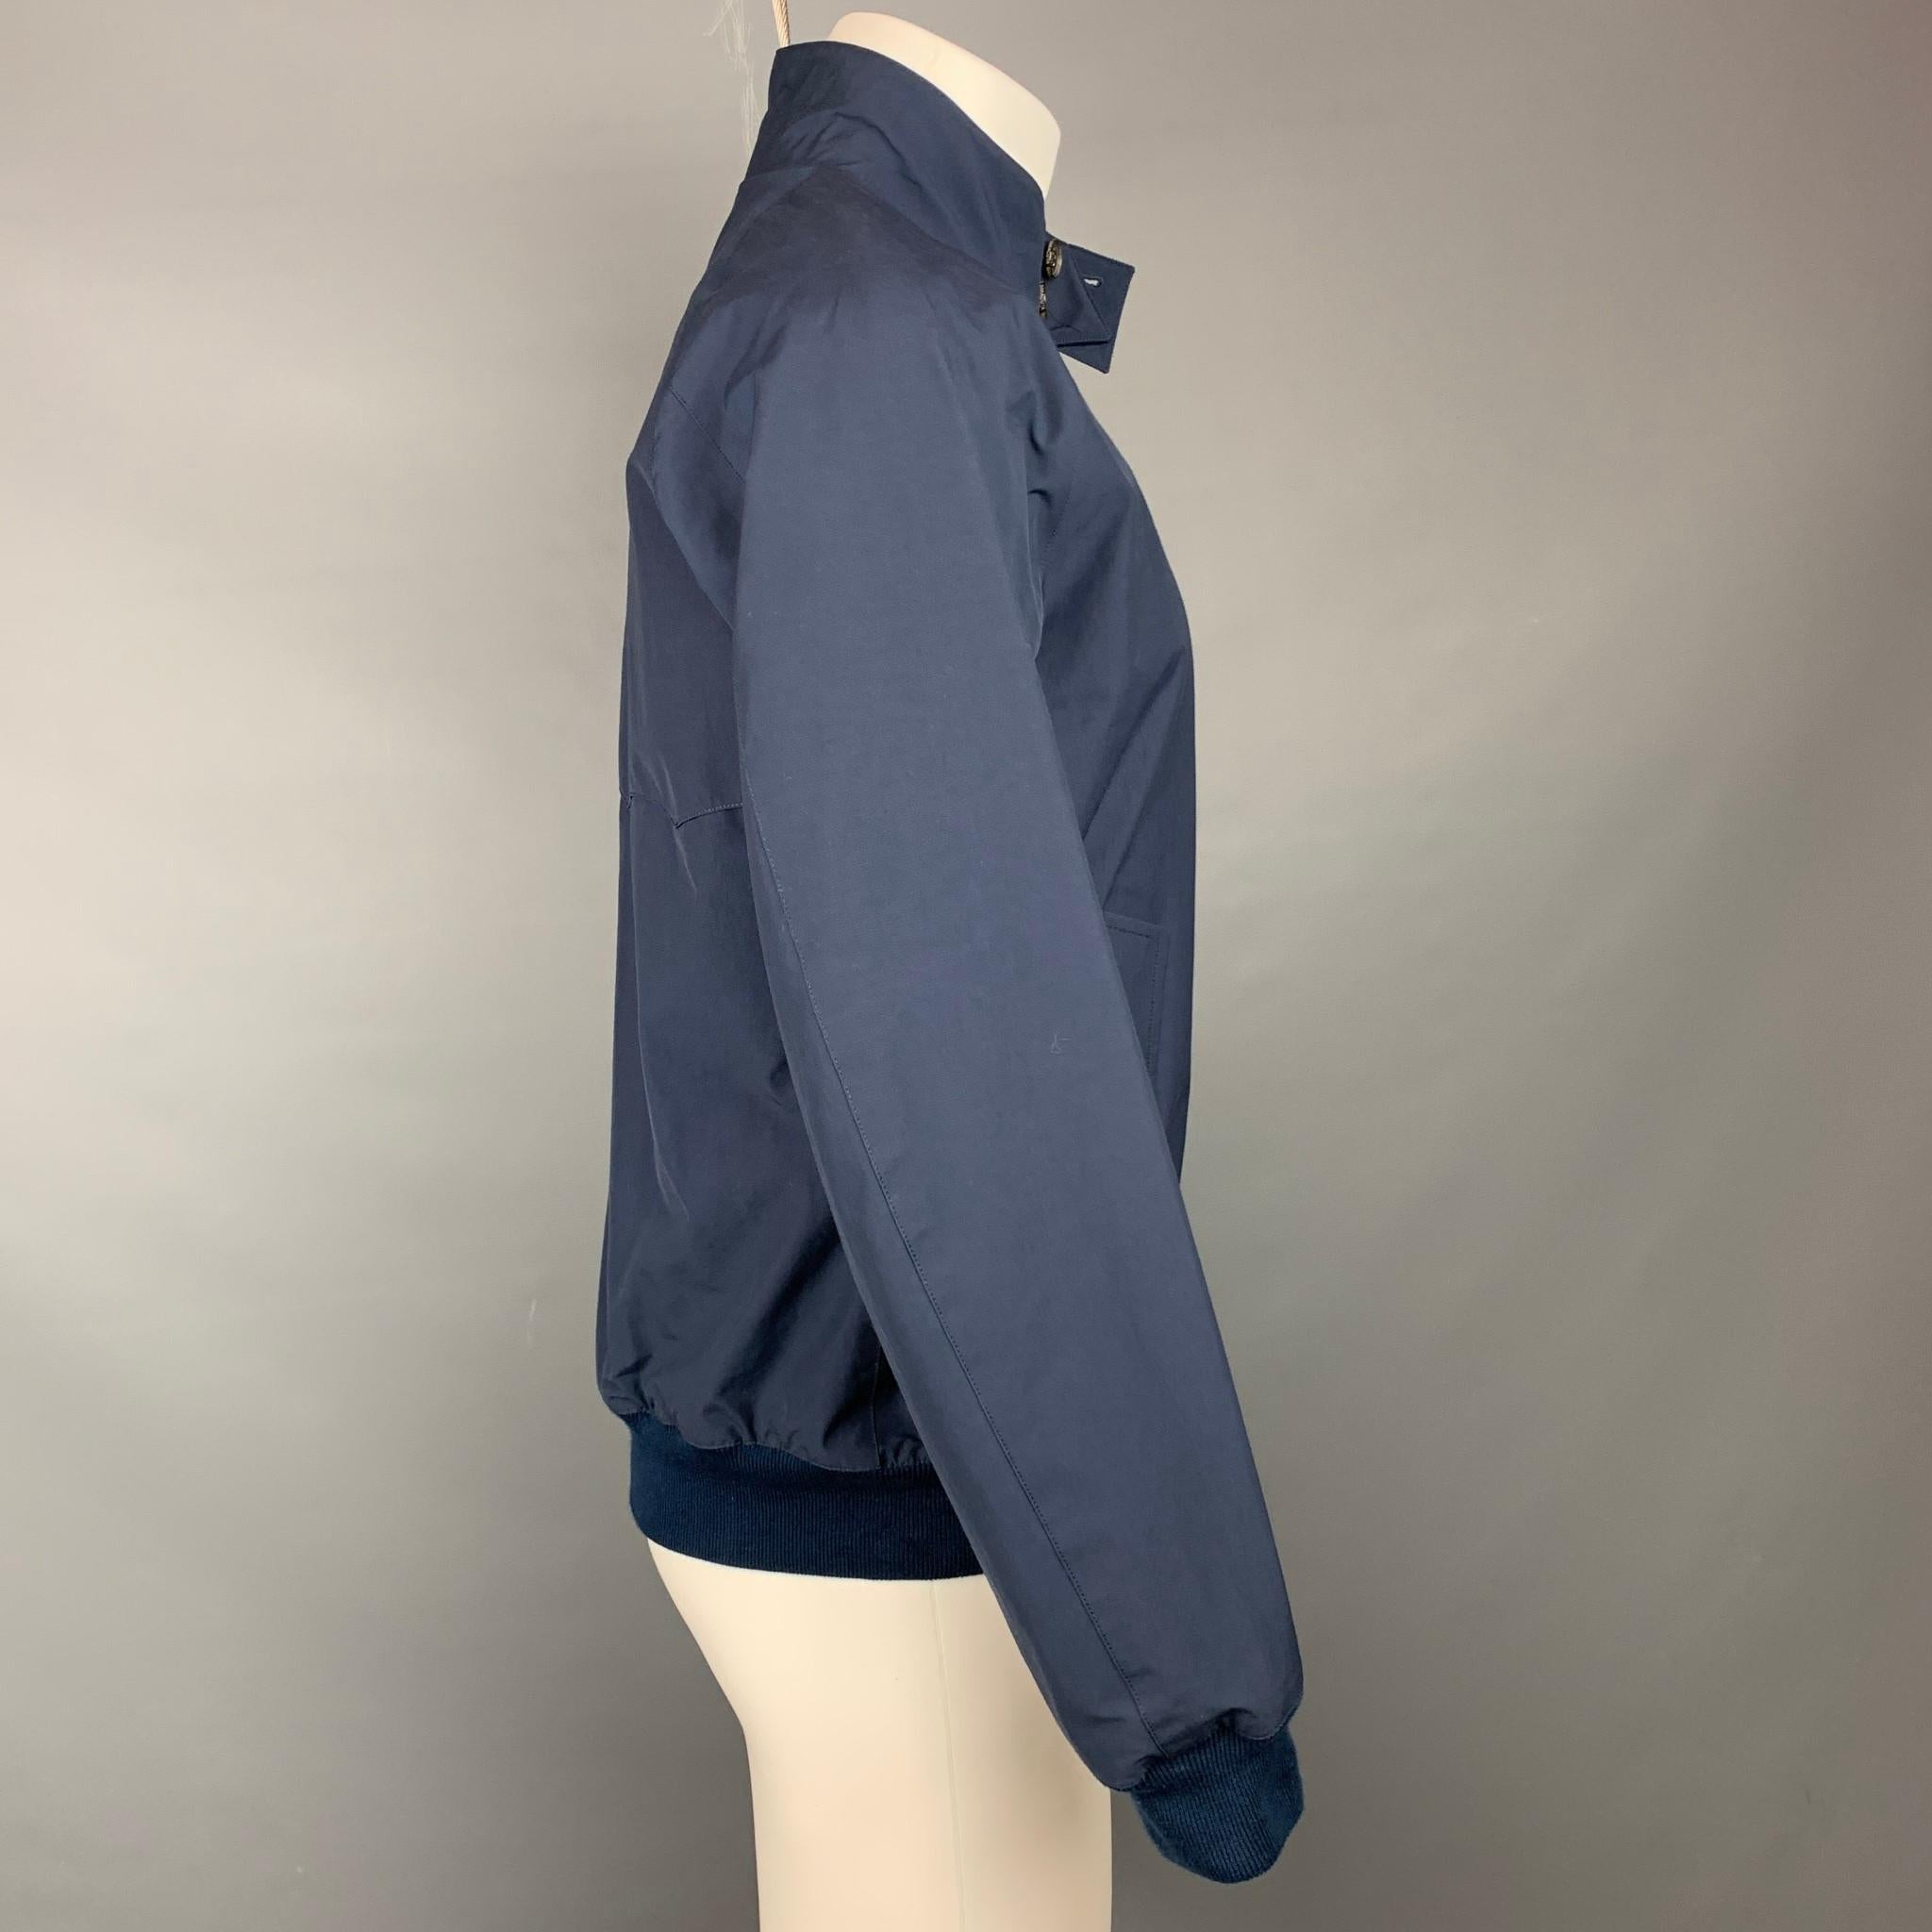 BARRACUDA jacket comes in a navy cotton / polyester with a plaid liner featuring a buttoned collar, ribbed hem, flap pockets, and a full zip up closure. Made in England.

Very Good Pre-Owned Condition.
Marked: 40
Original Retail Price: